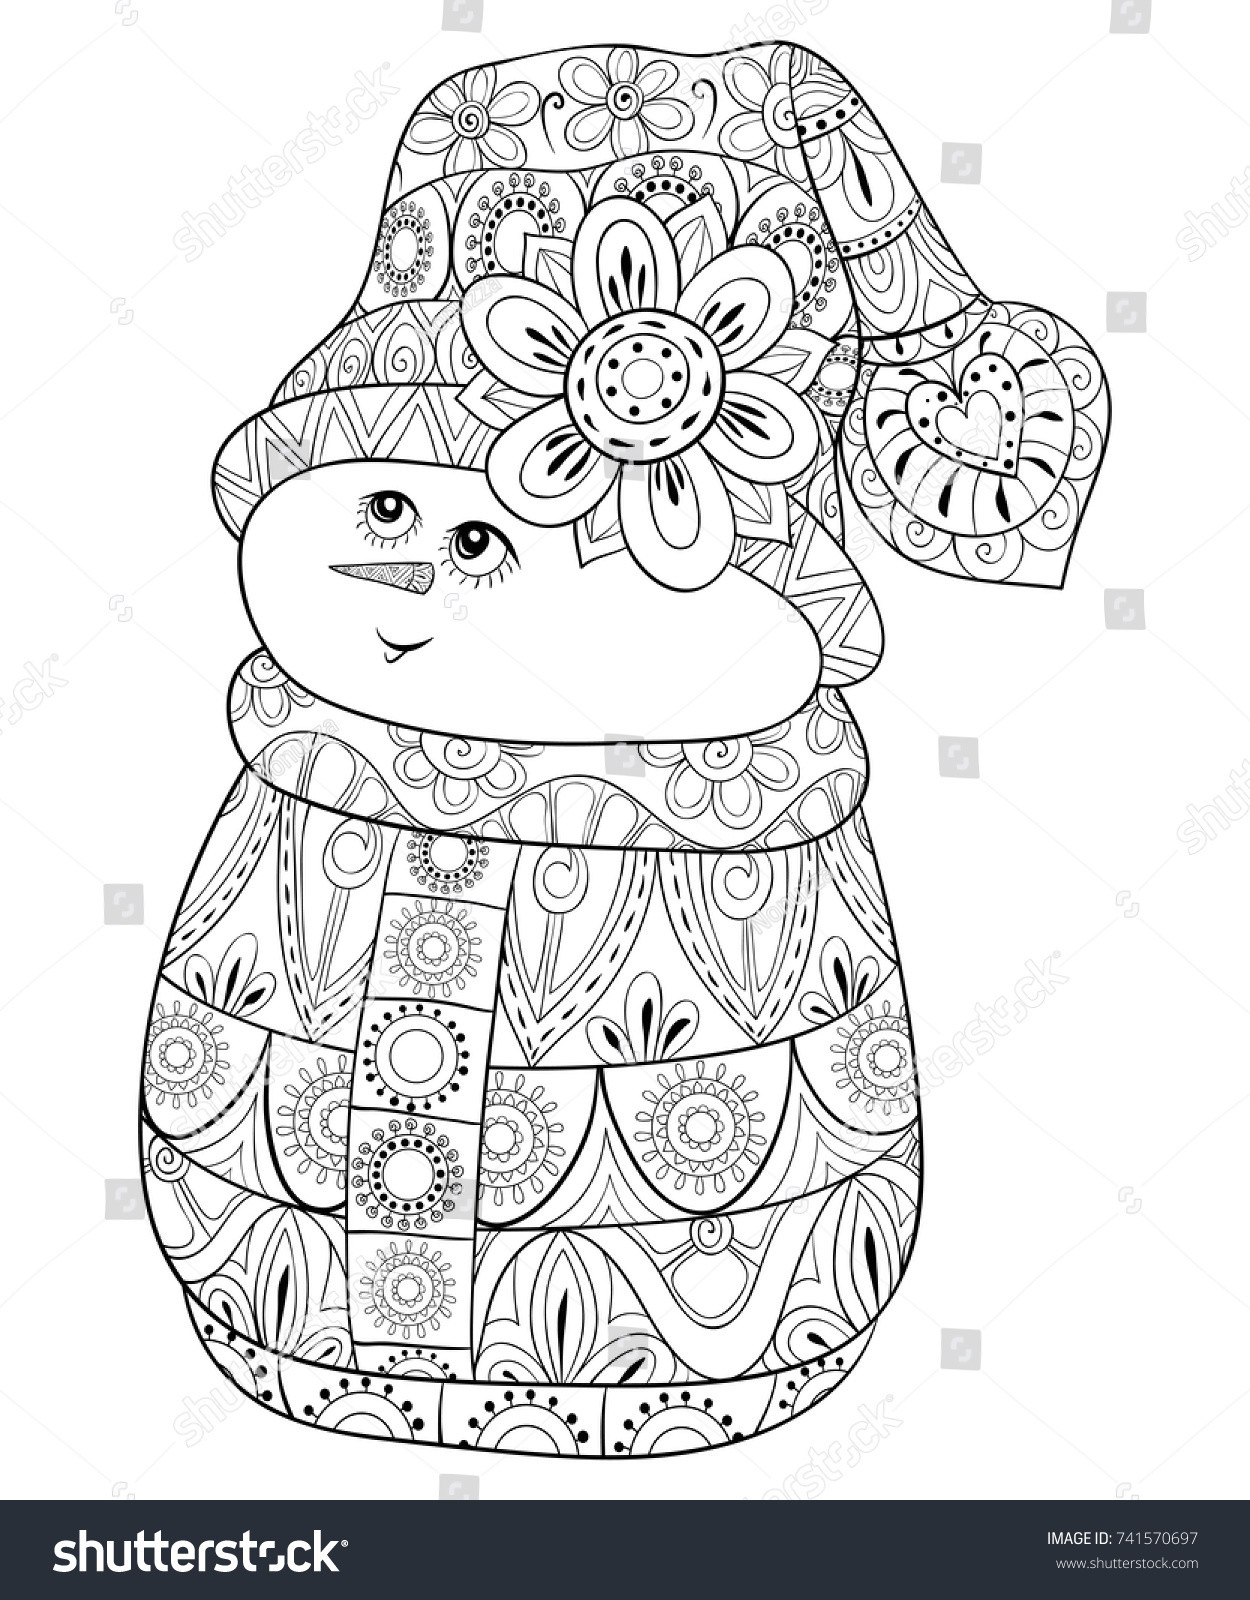 Snowman Coloring Pages For Adults
 Adult Coloring Pagebook Snowman Art Style Stock Vector